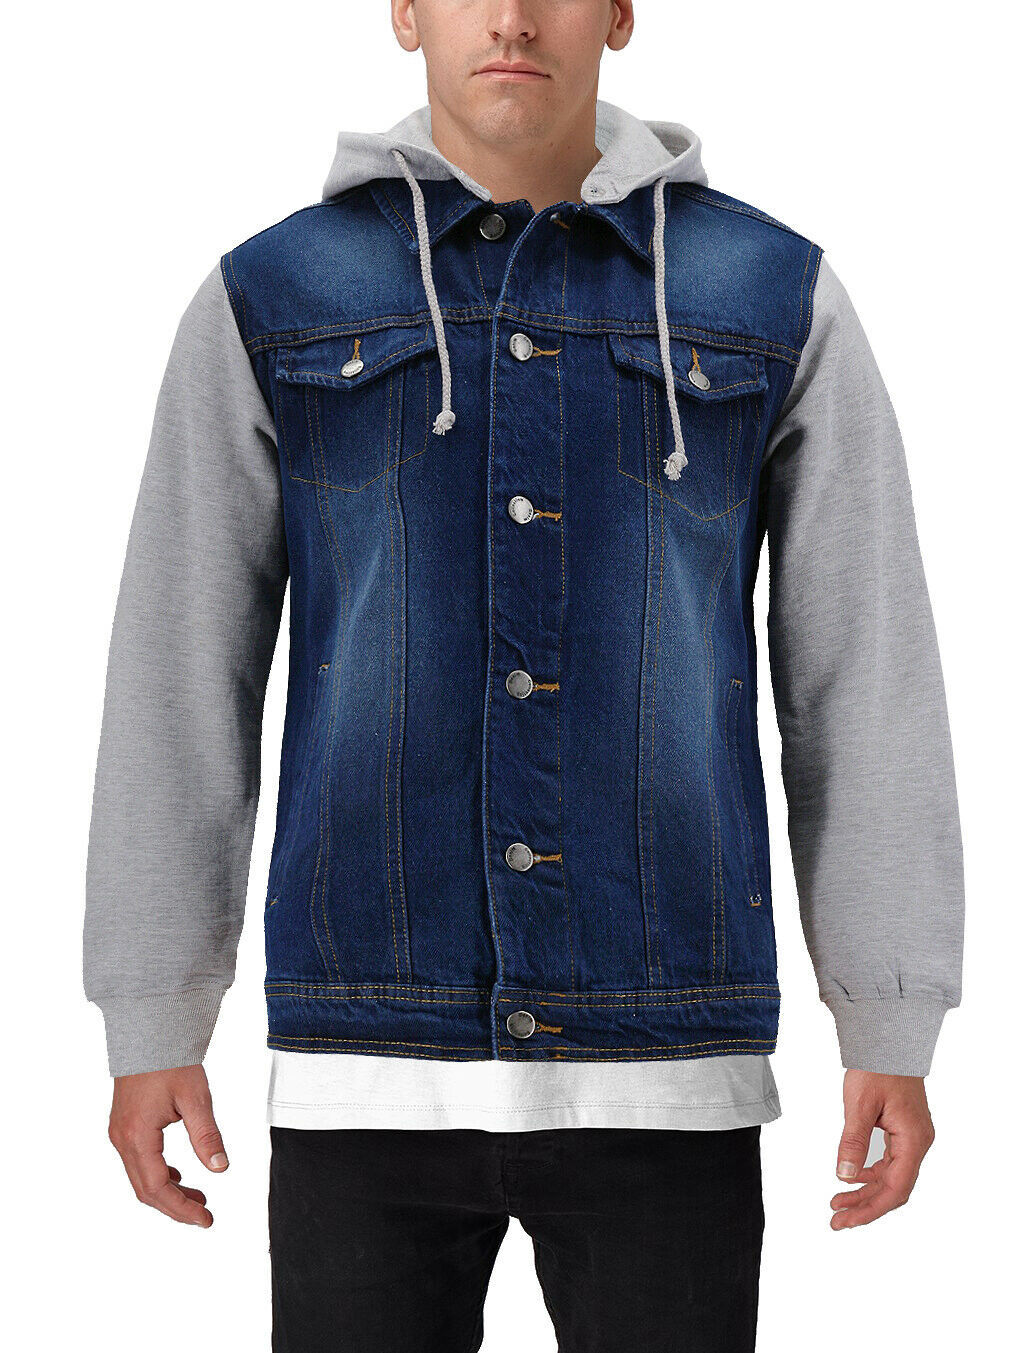 Men's Two Tone Jean And Grey Jersey with Removable Hood Denim Trucker ...